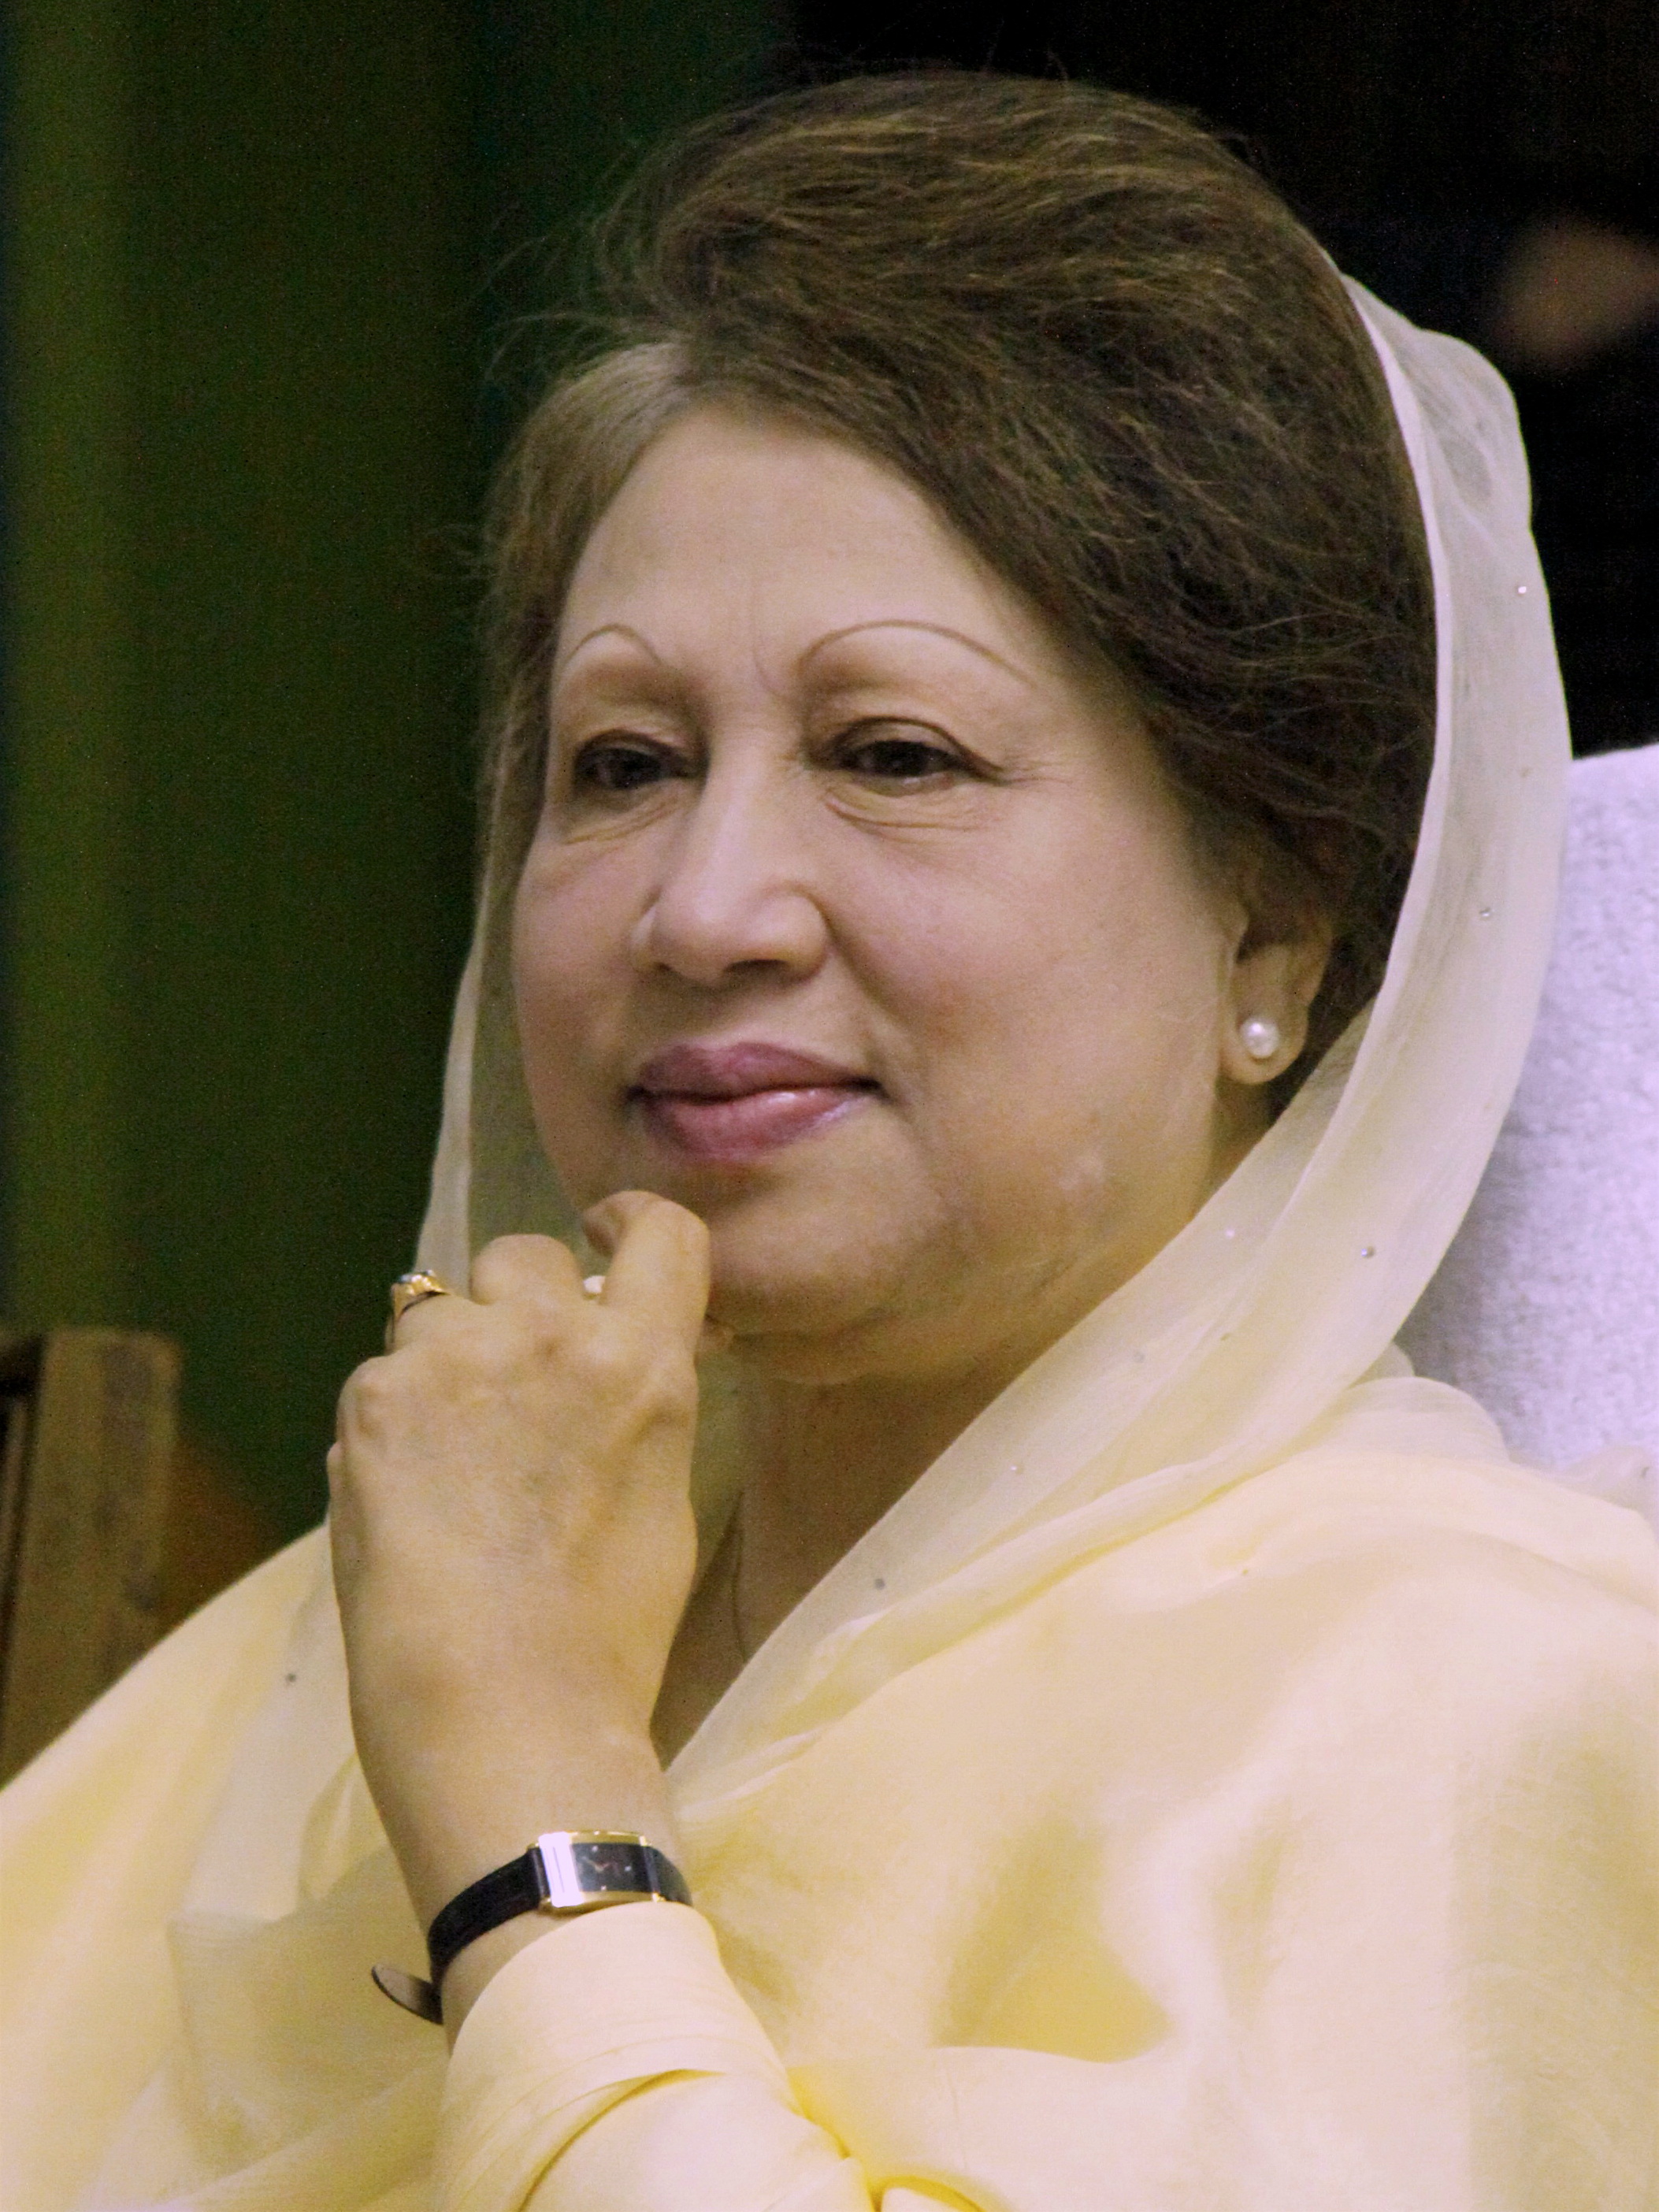 Wearing a mask and clad in a black saree,  former Prime Minister Khaleda Zia came out of the jail in a wheelchair. She was flanked by her supporters and party workers. She rode a car to her home in Dhaka's posh Gulshan colony.

